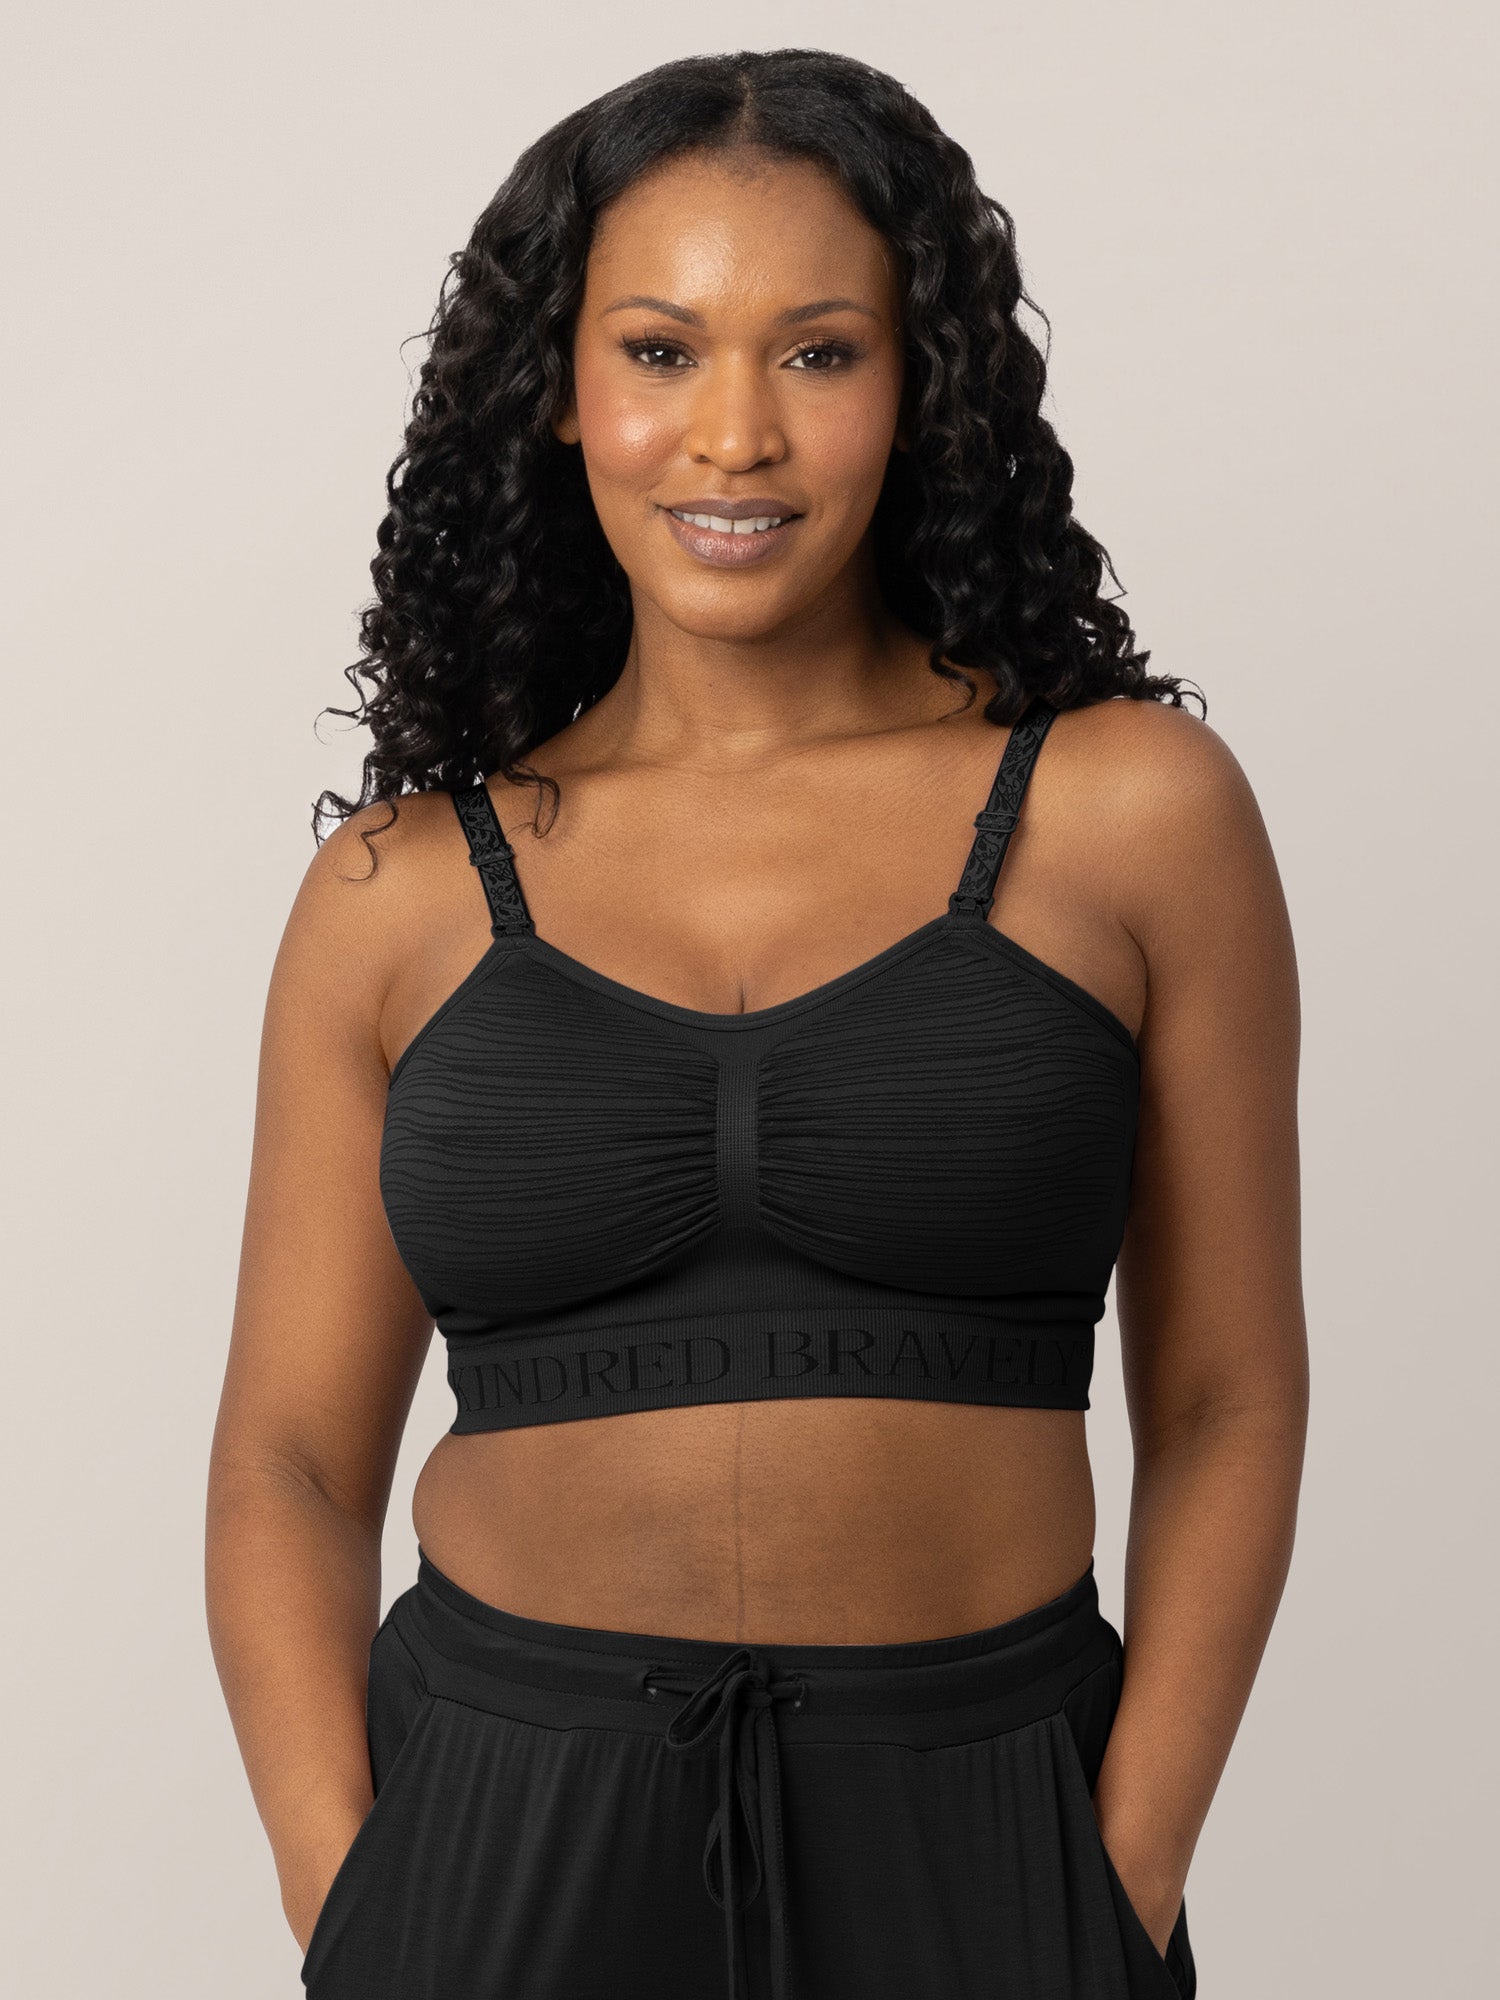 Kindred Bravely 3-Pack Hands Free Pumping Bra Wash, Wear, Spare Bundle  (Beige/Black, Medium-Busty) at  Women's Clothing store